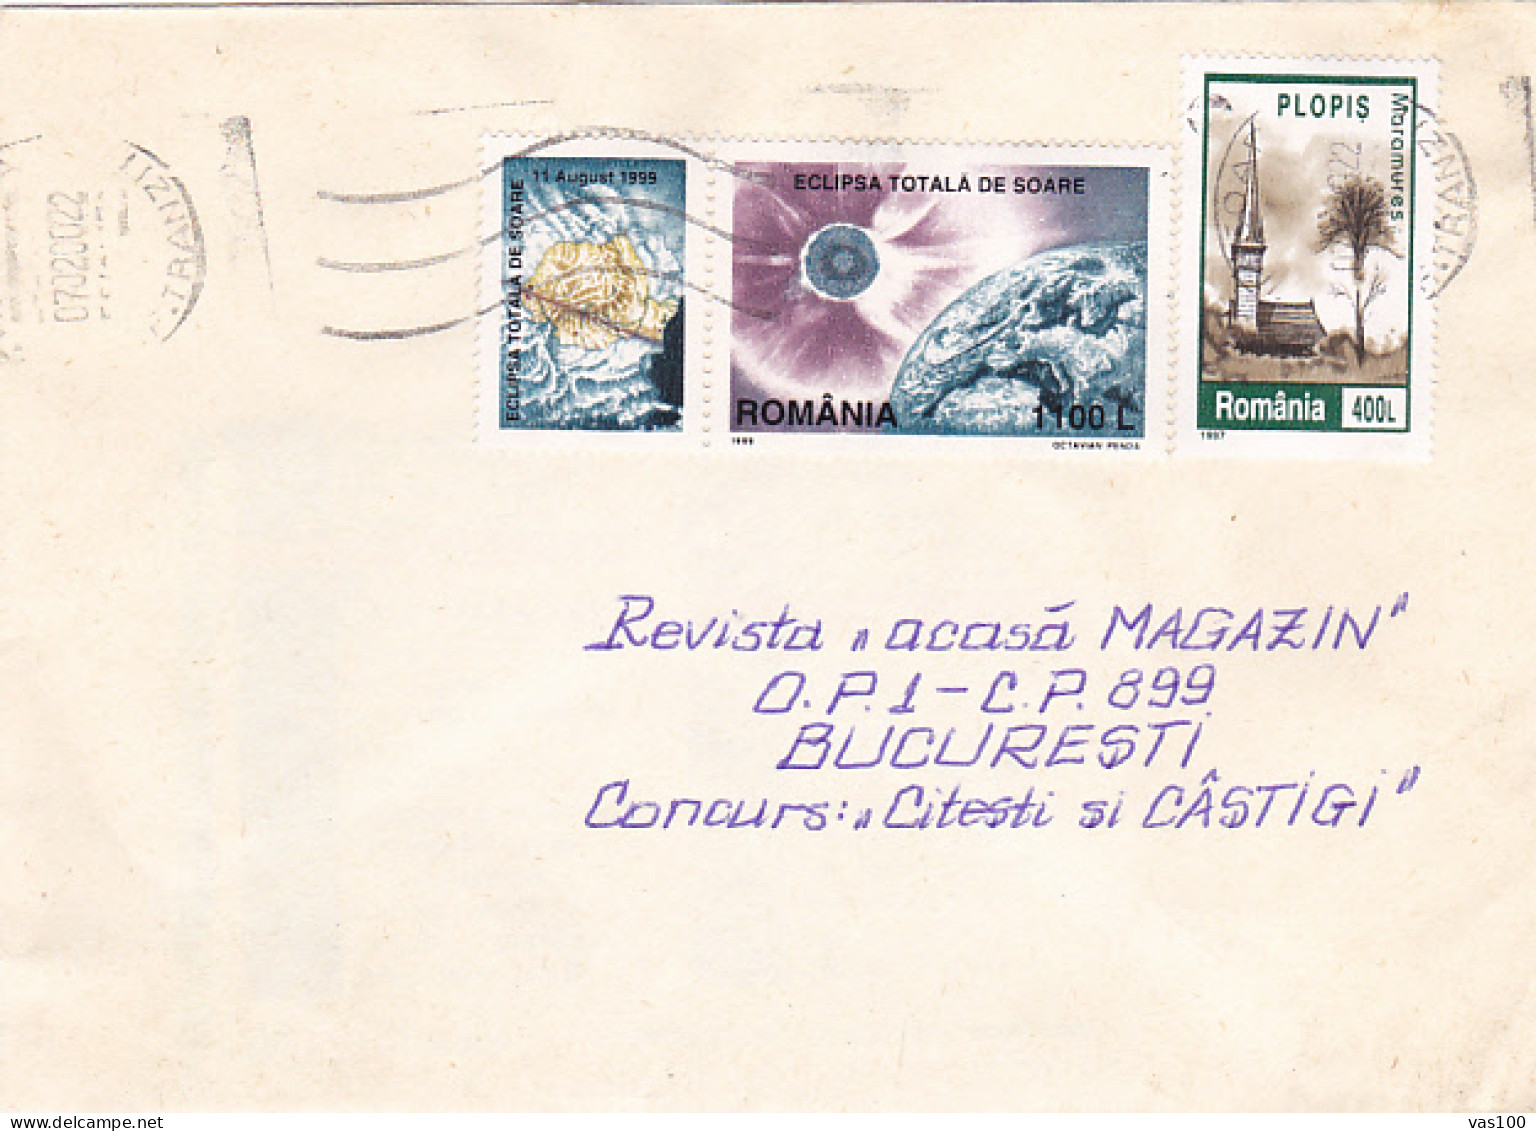 TOTAL SOLAR ECLIPSE, MARAMURES WOODEN CHURCH, STAMPS ON COVER, 2000, ROMANIA - Briefe U. Dokumente